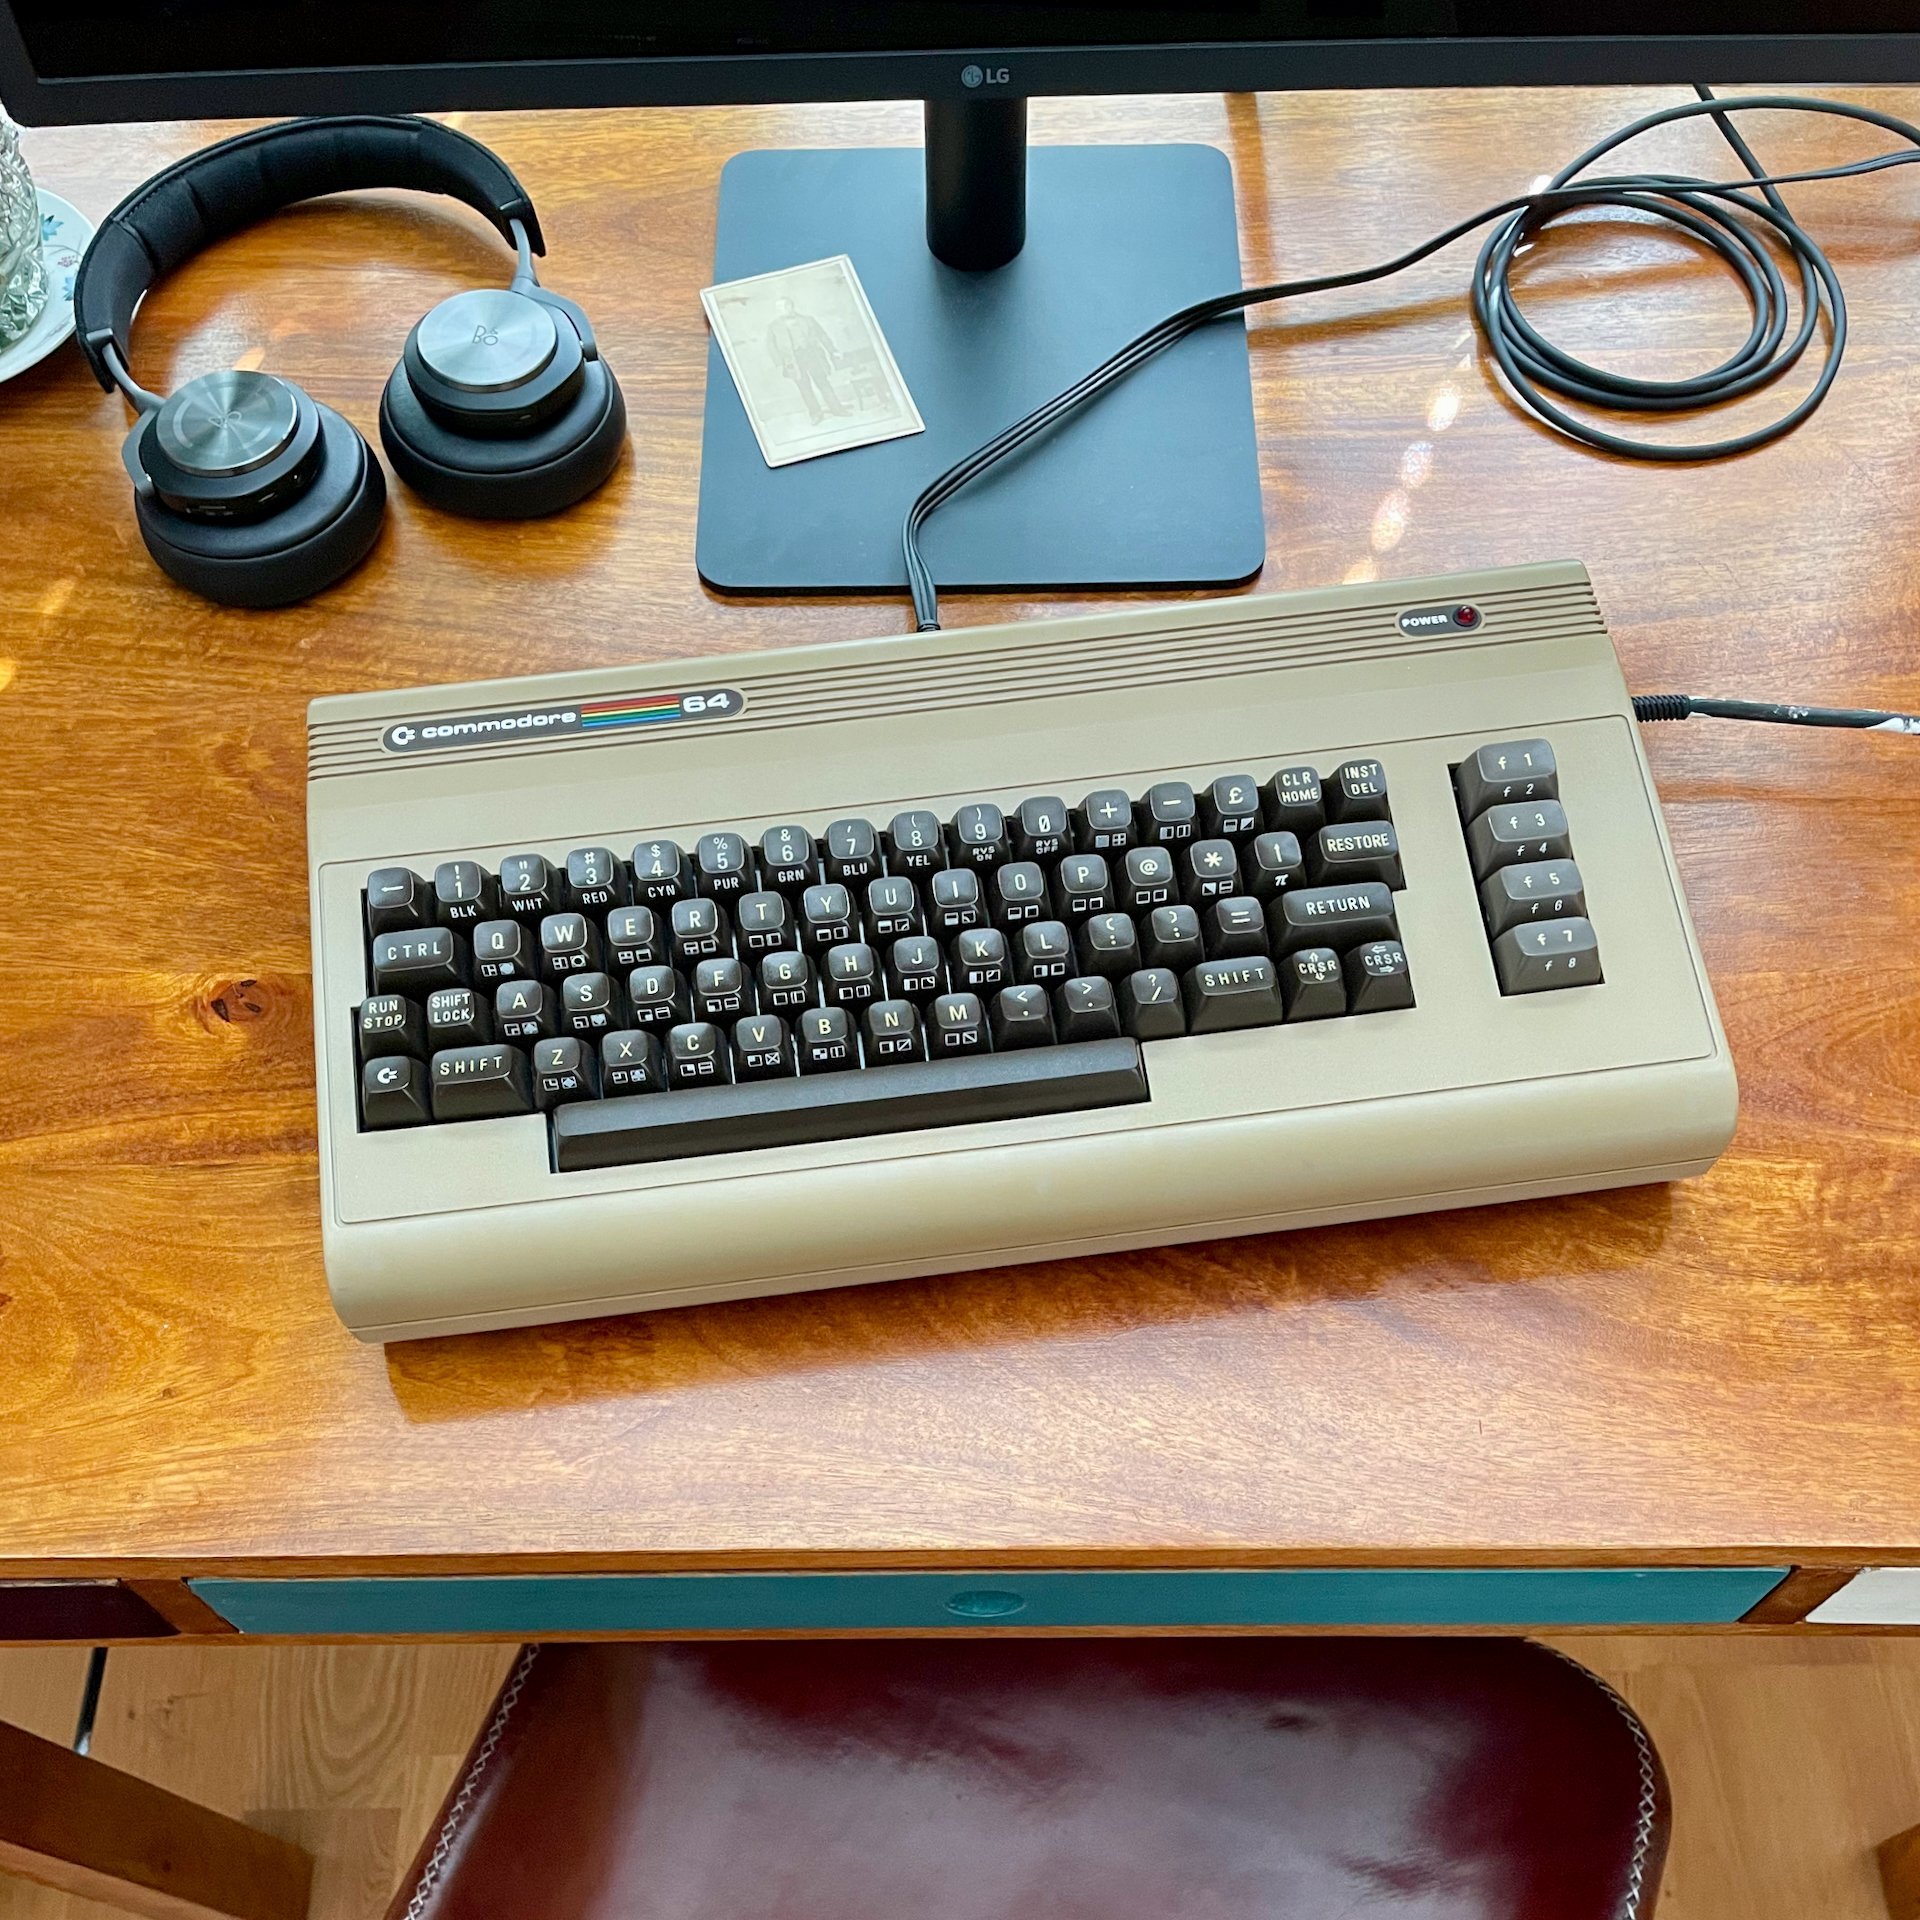 An old, but pretty looking, Commodore 64 computer on a desk.